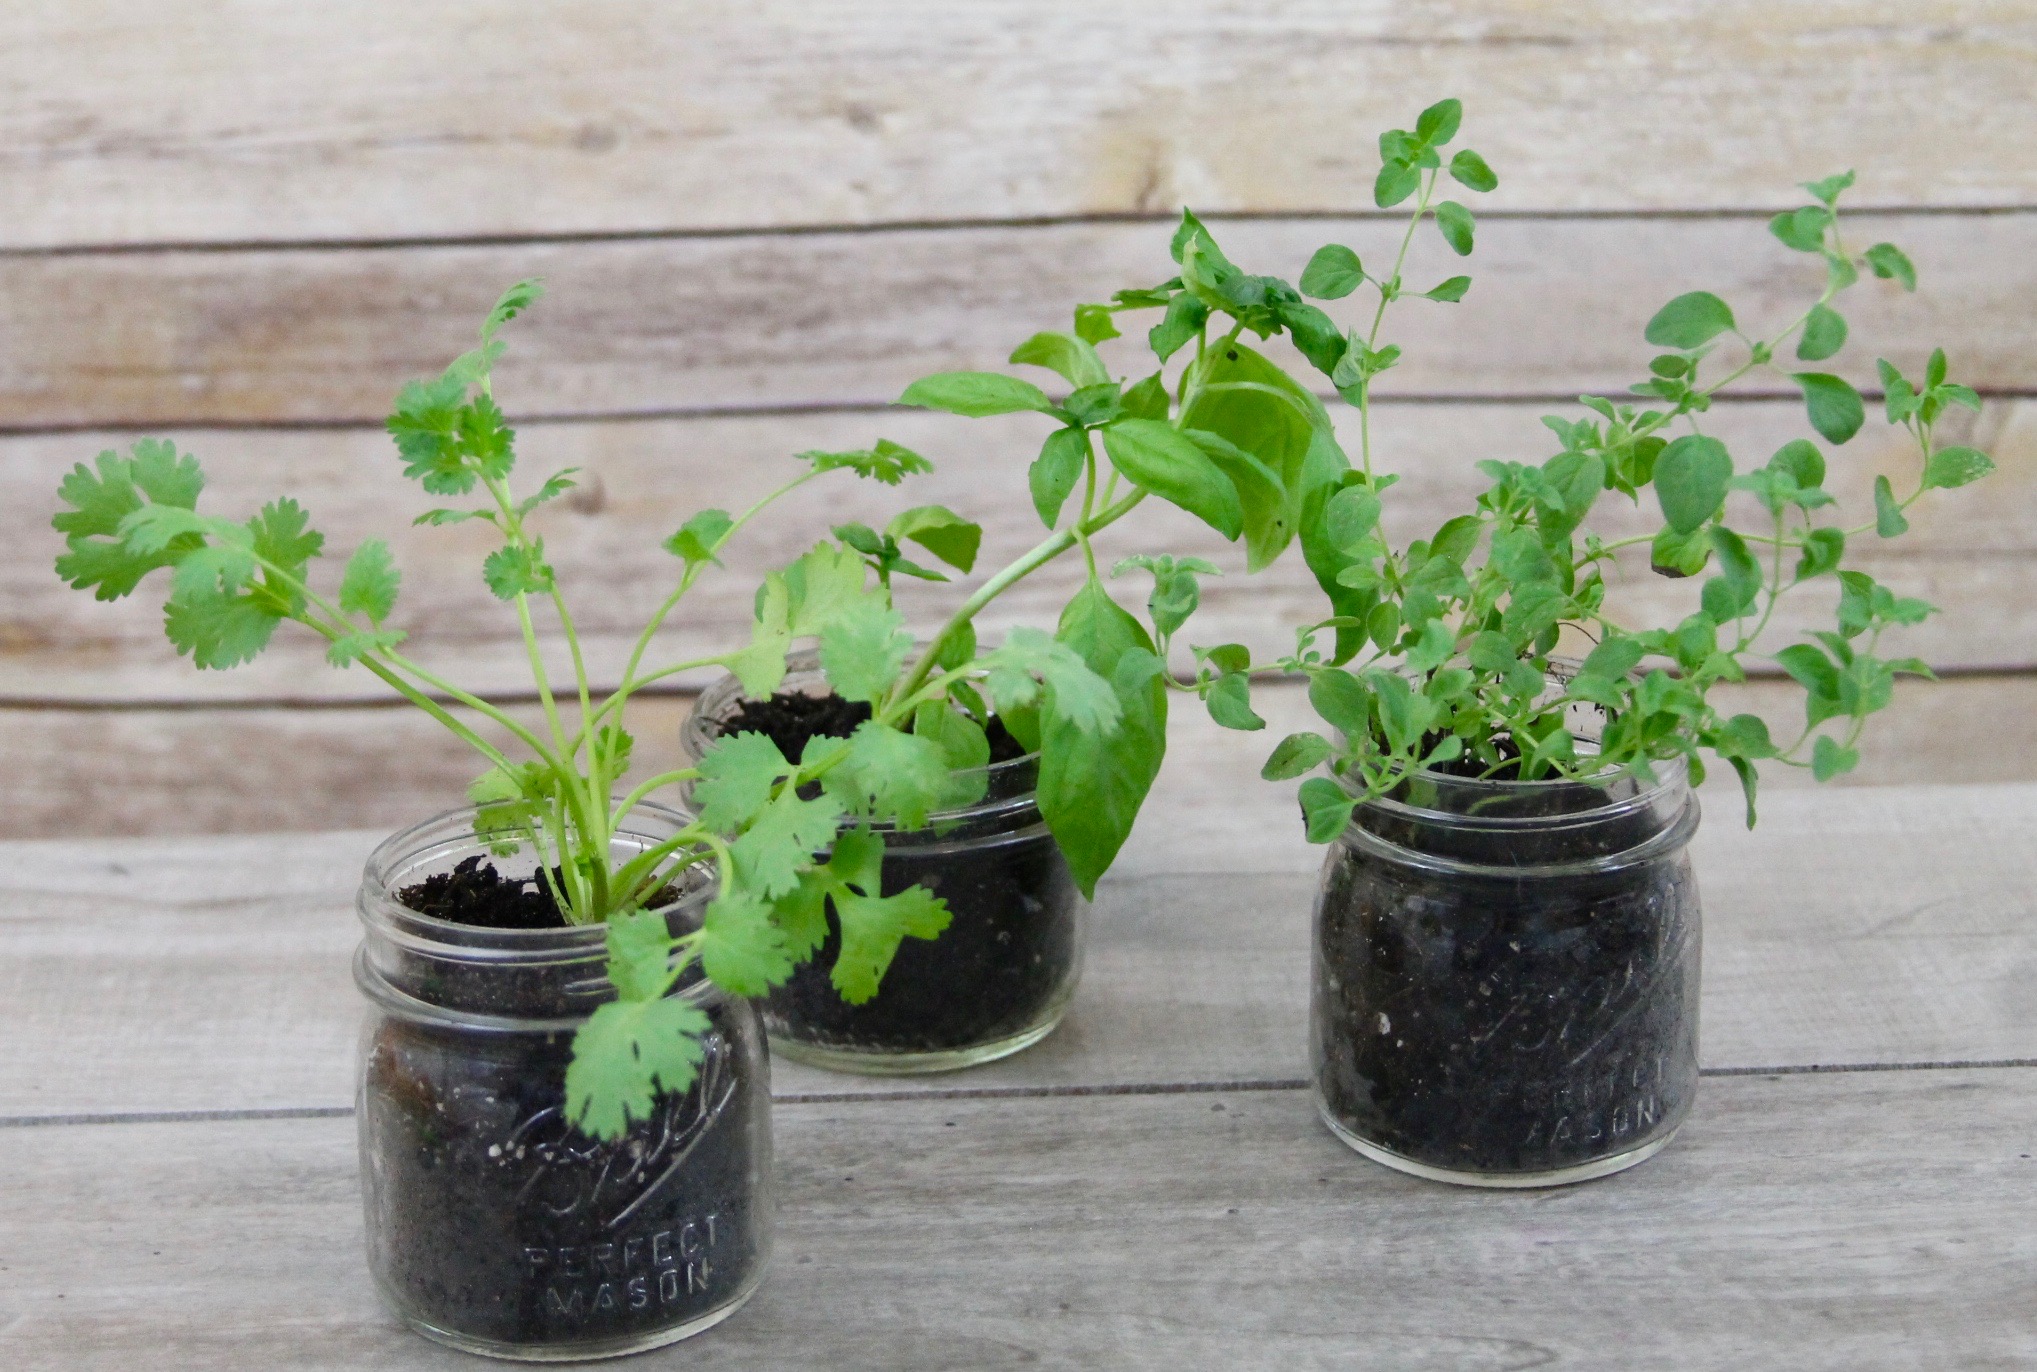 Growing Your Own Herbs and Other Fun Hands-On STEM Projects for Kids